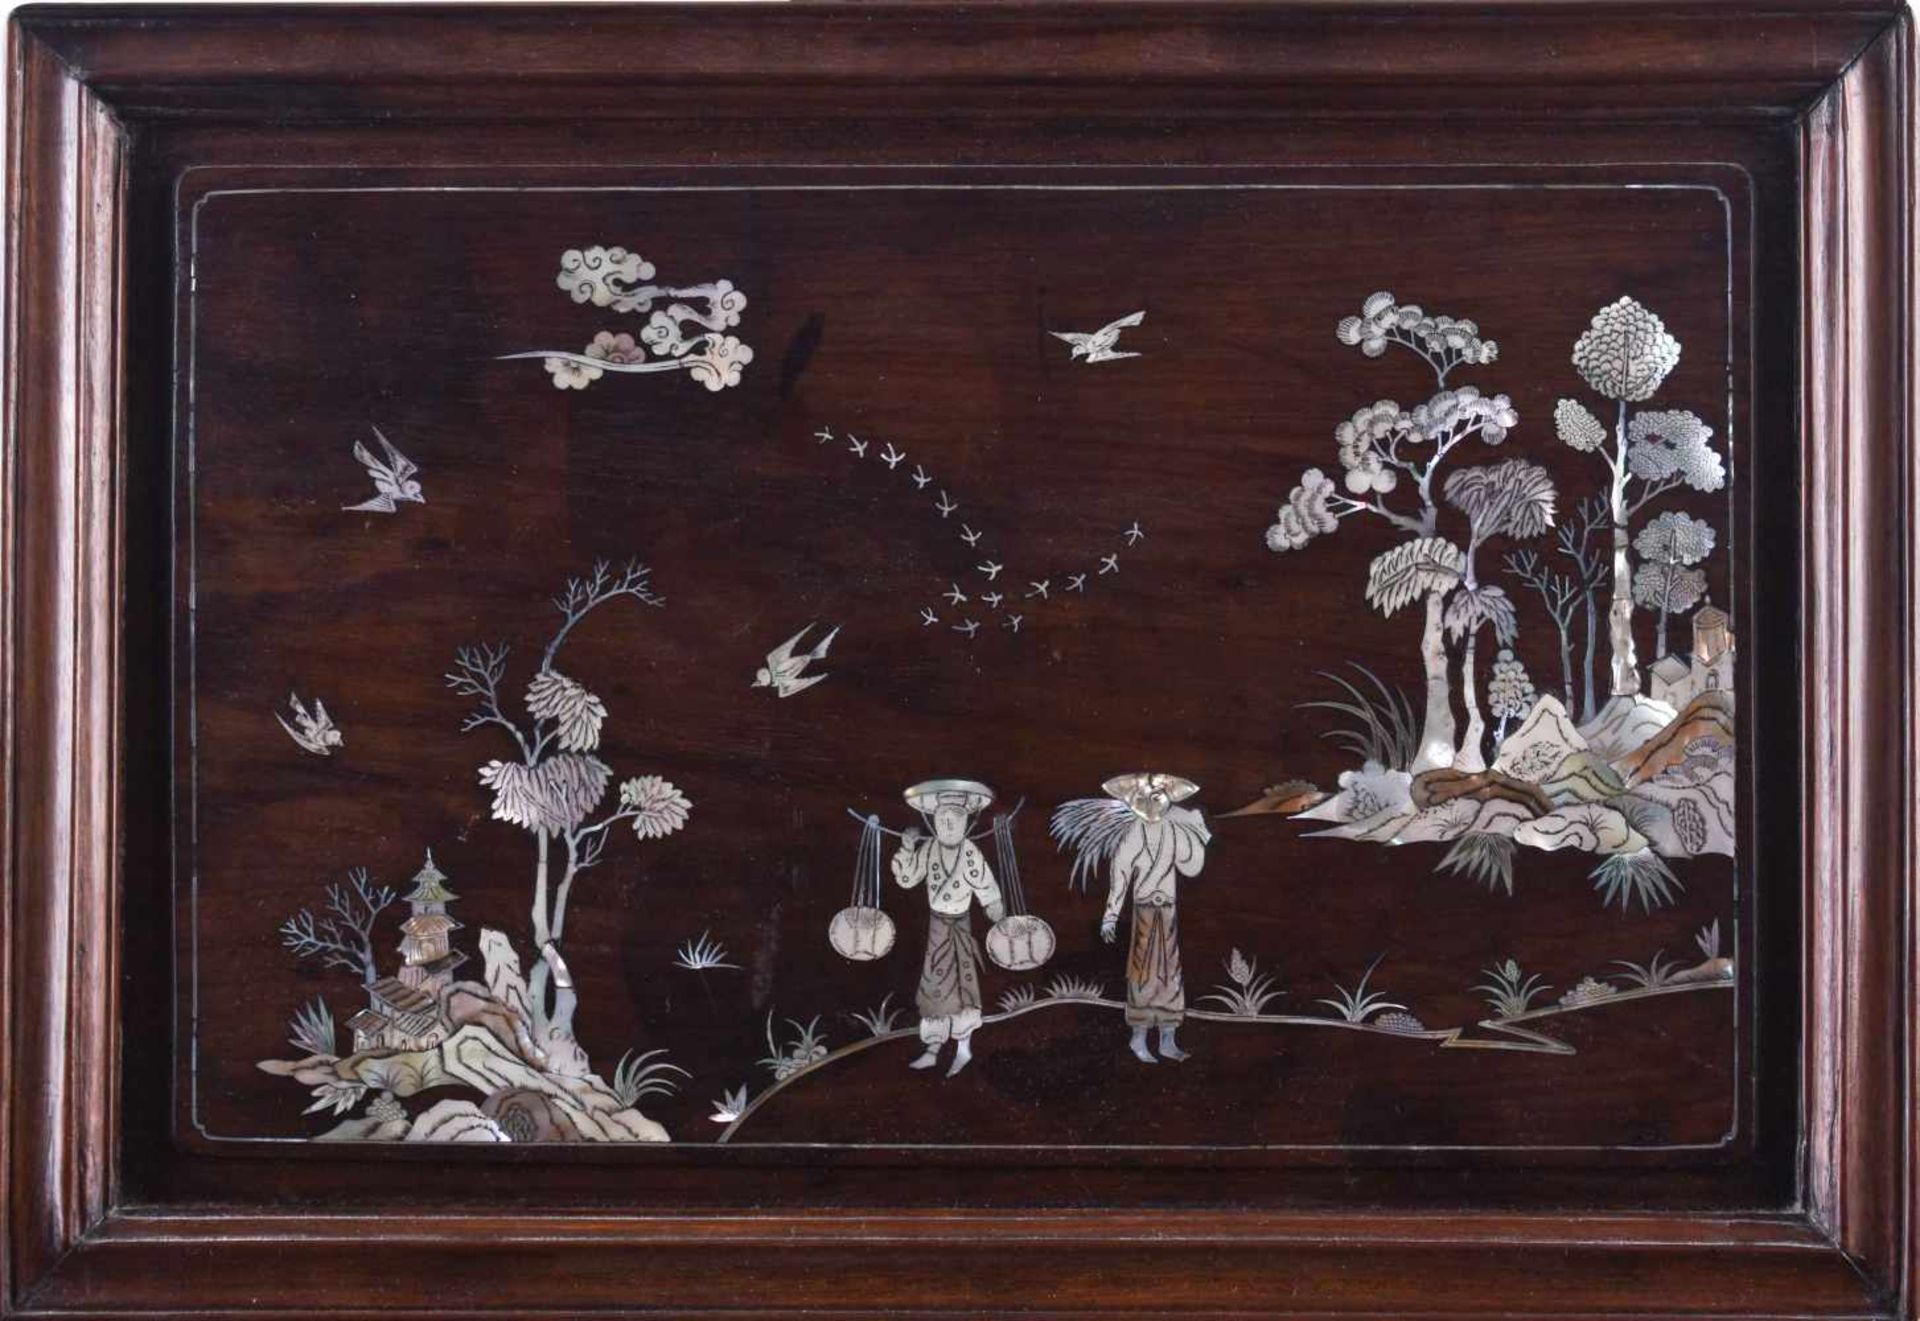 Wall painting China Qing periodwood with mother-of-pearl inlays, landscape decoration with bird